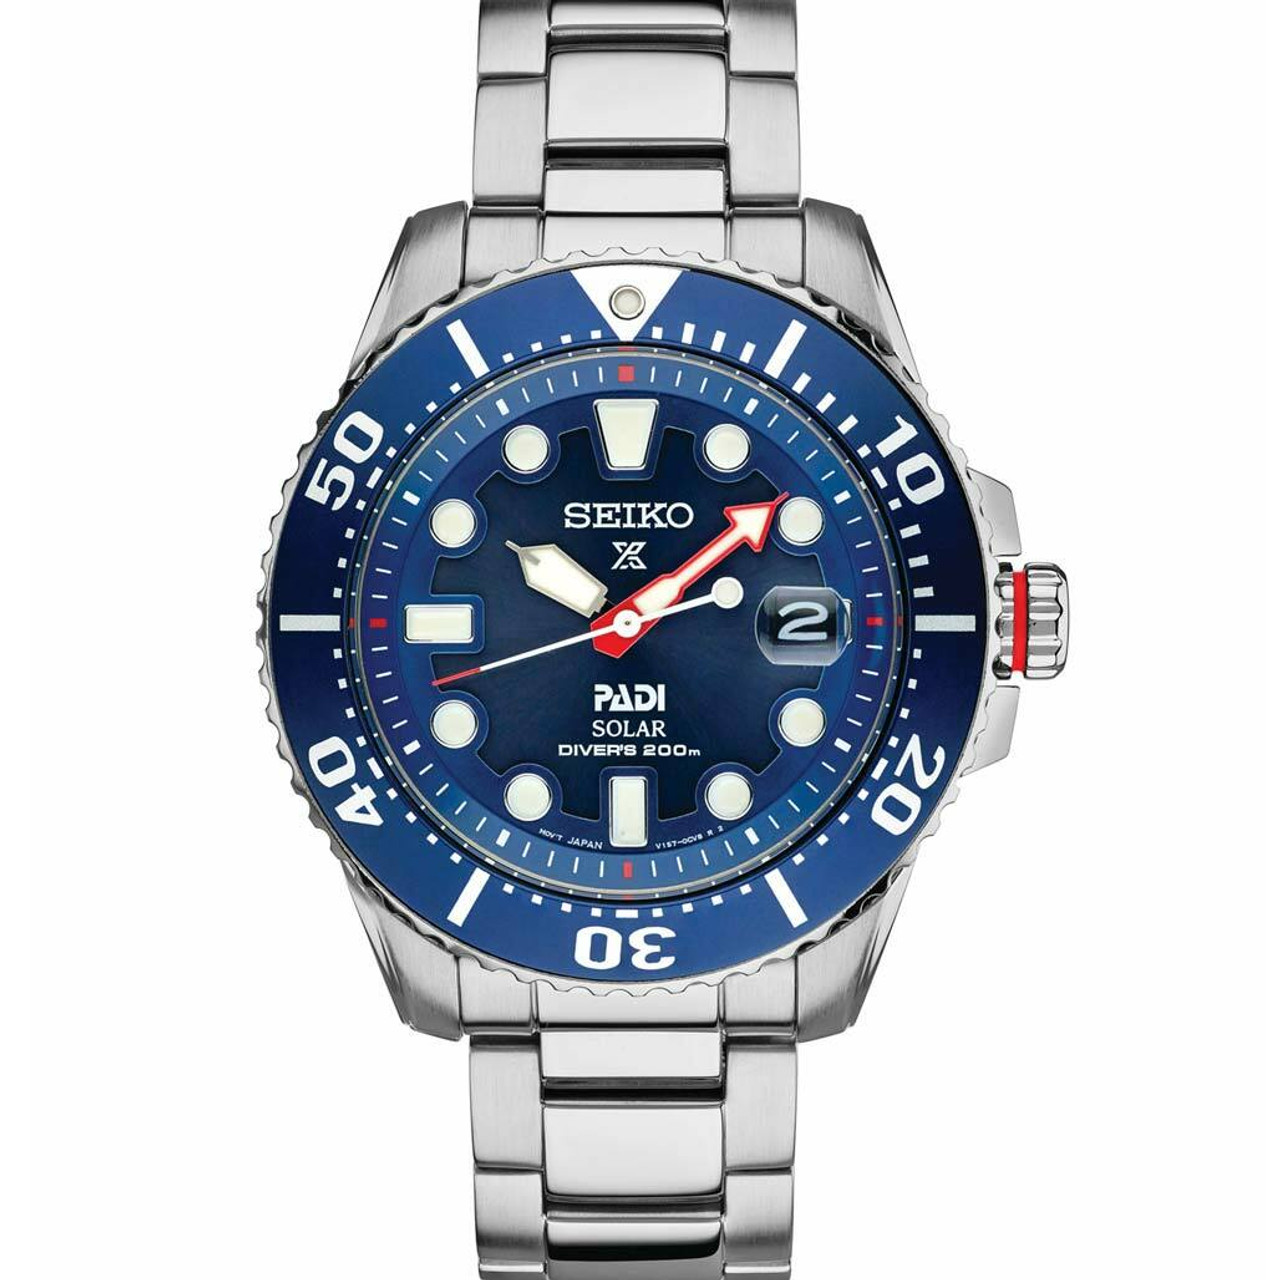 Seiko Releases The Prospex Glacier 'Save the Ocean' 110th Anniversary Watch  – WristReview.com – Featuring Watch Reviews, Critiques, Reports & News